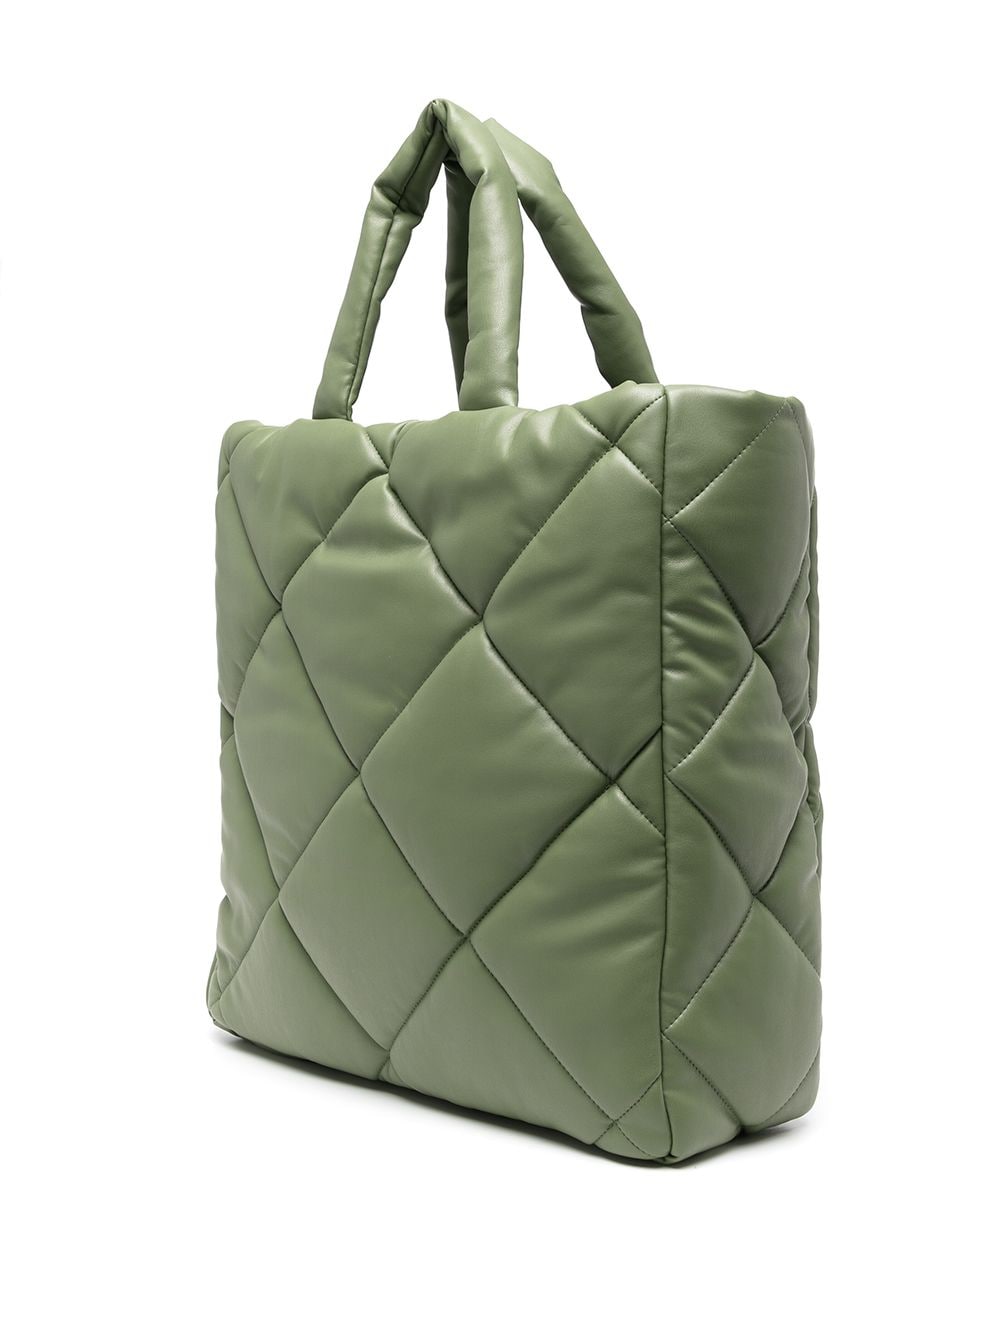 STAND STUDIO Quilted Tote Bag - Farfetch